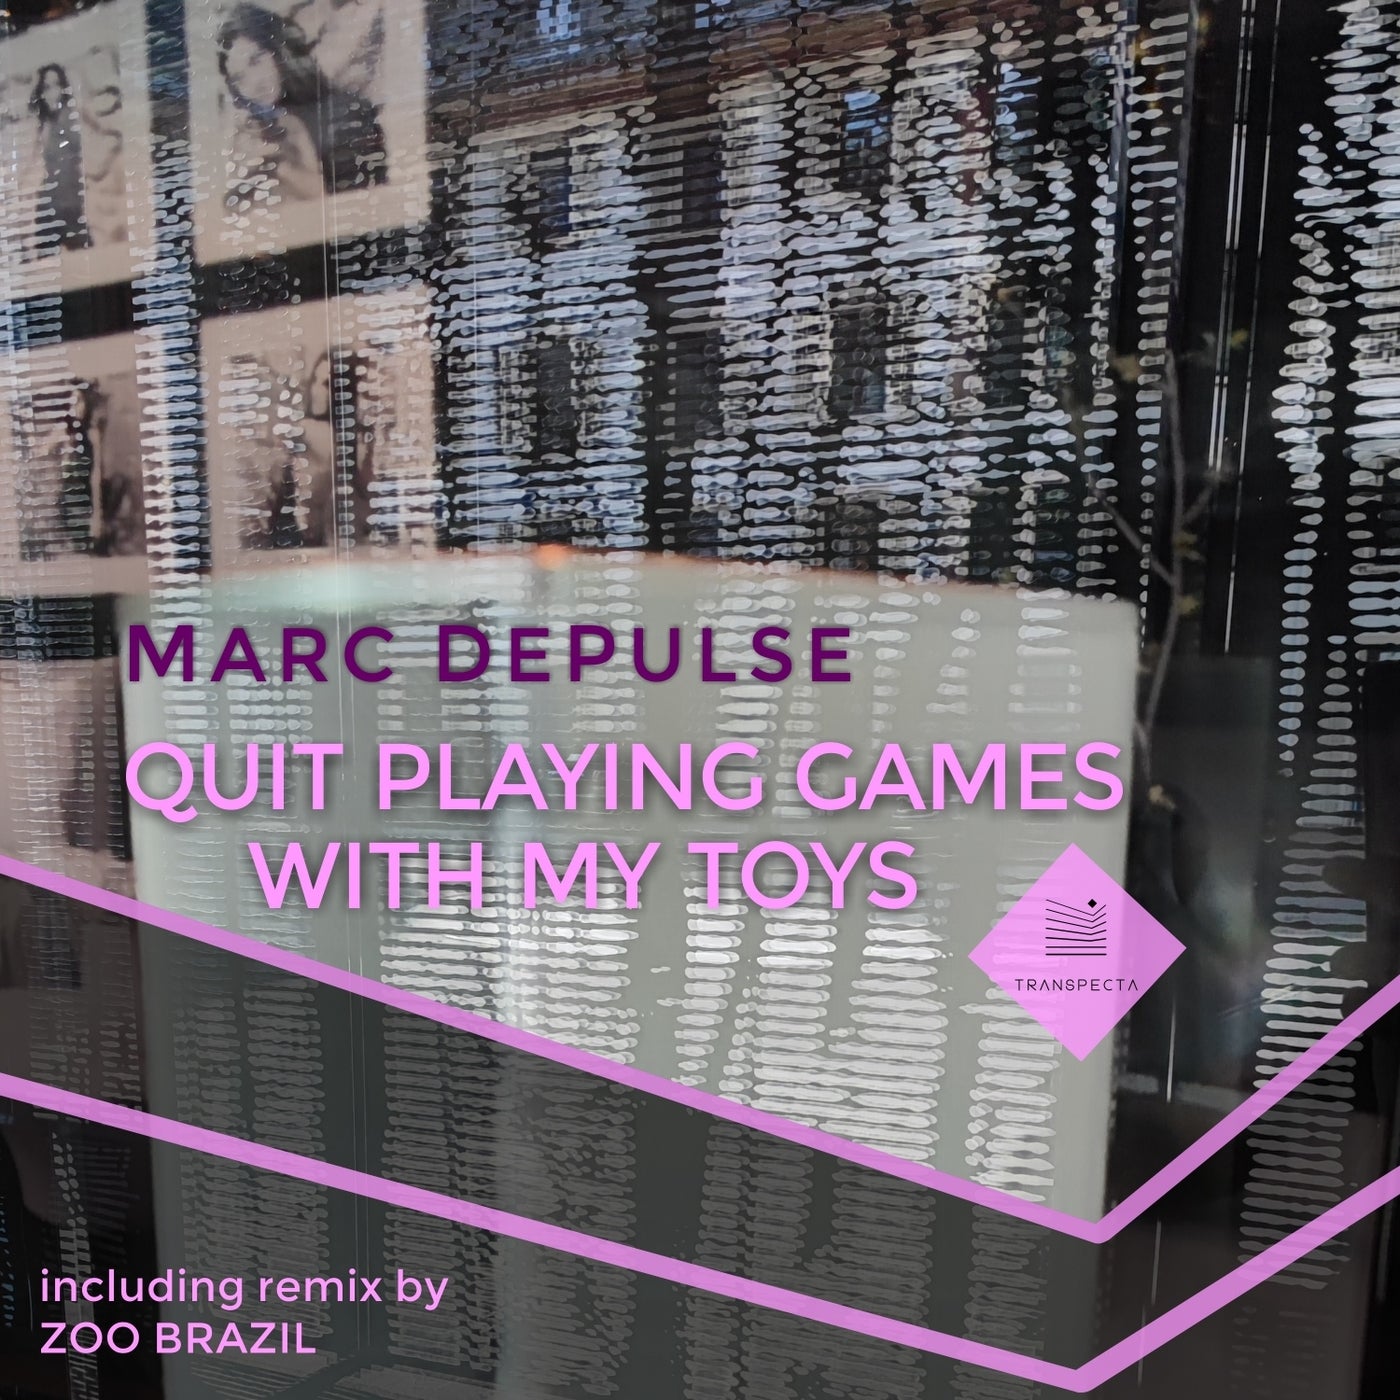 Marc DePulse - Quit Playing Games With My Toys (Original Mix)